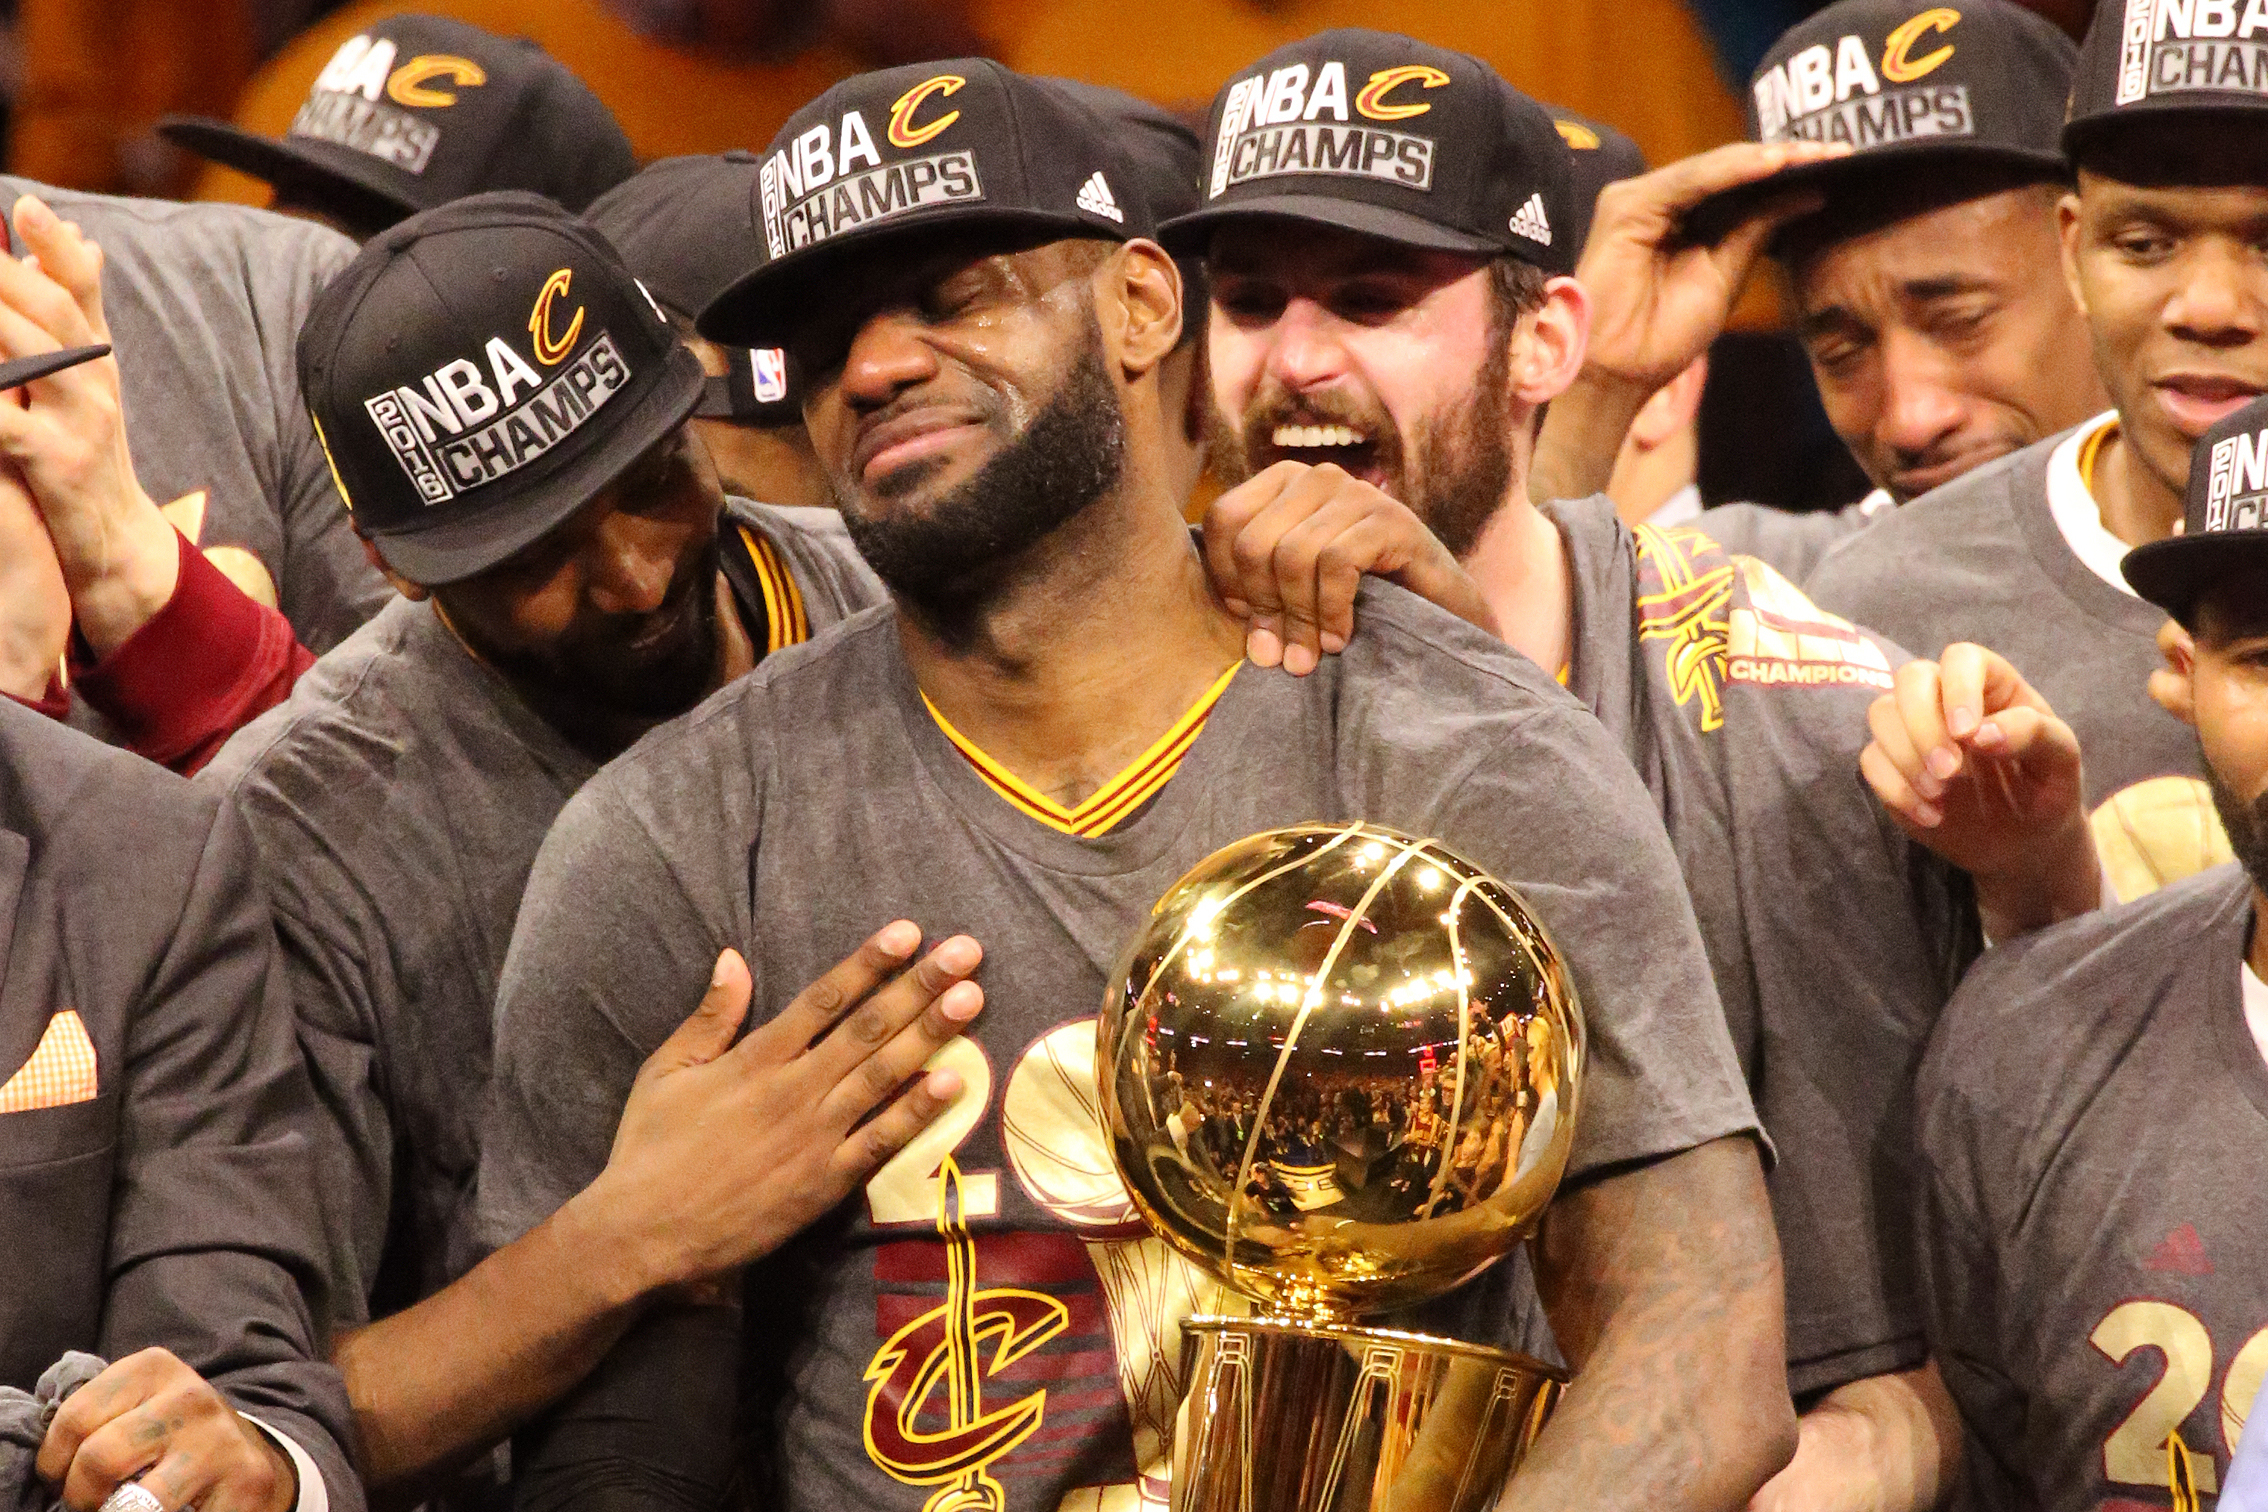 Cavs news: LeBron James posts reminder about loyalty to Cleveland fans